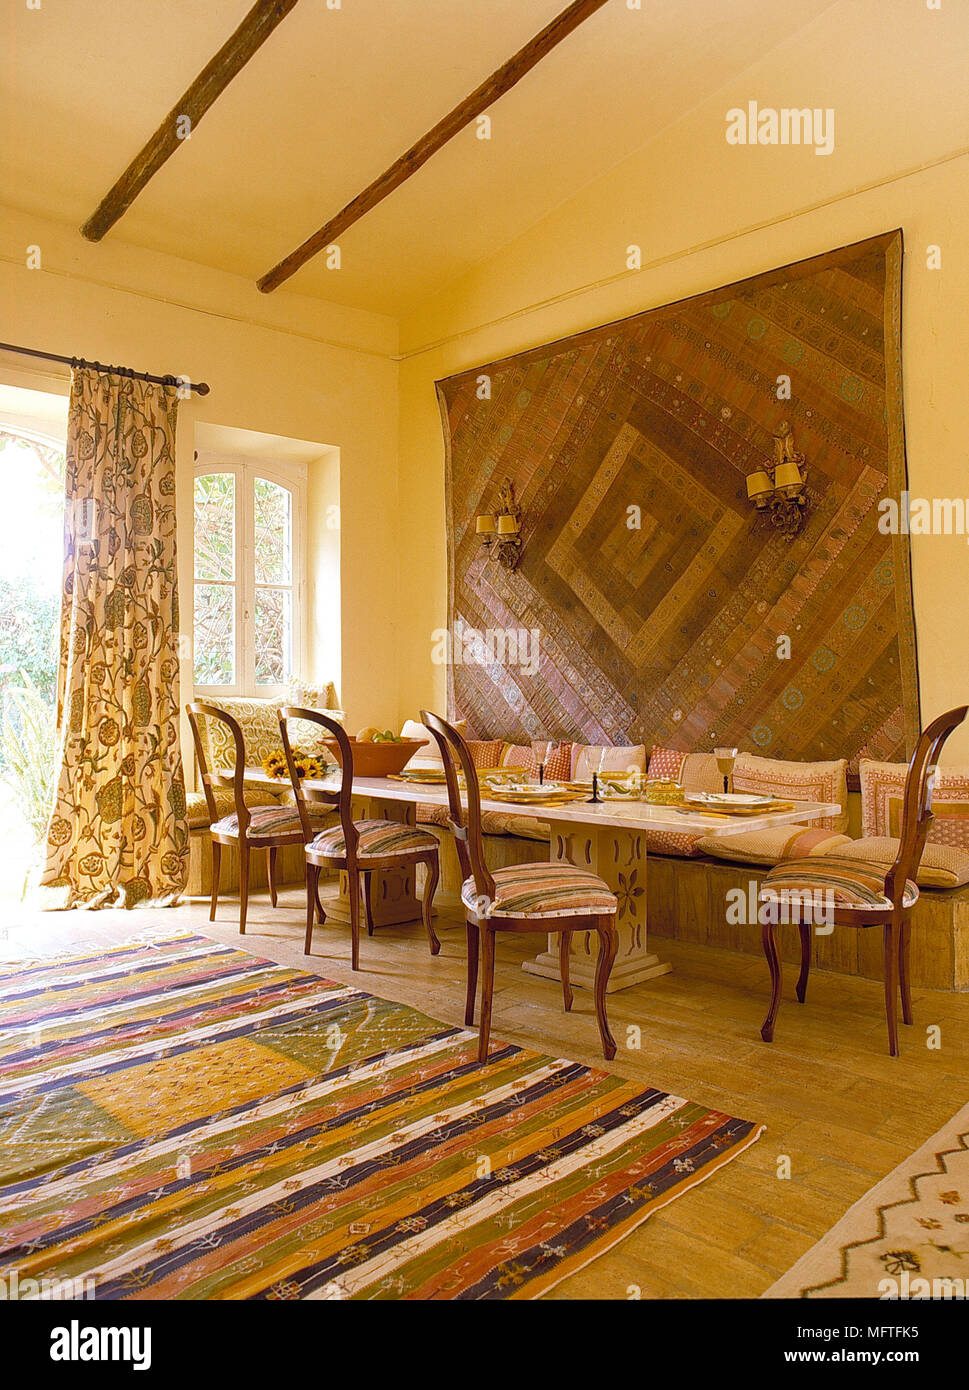 Patterned rug and geometric wall hanging in dining room with high beamed ceiling Stock Photo